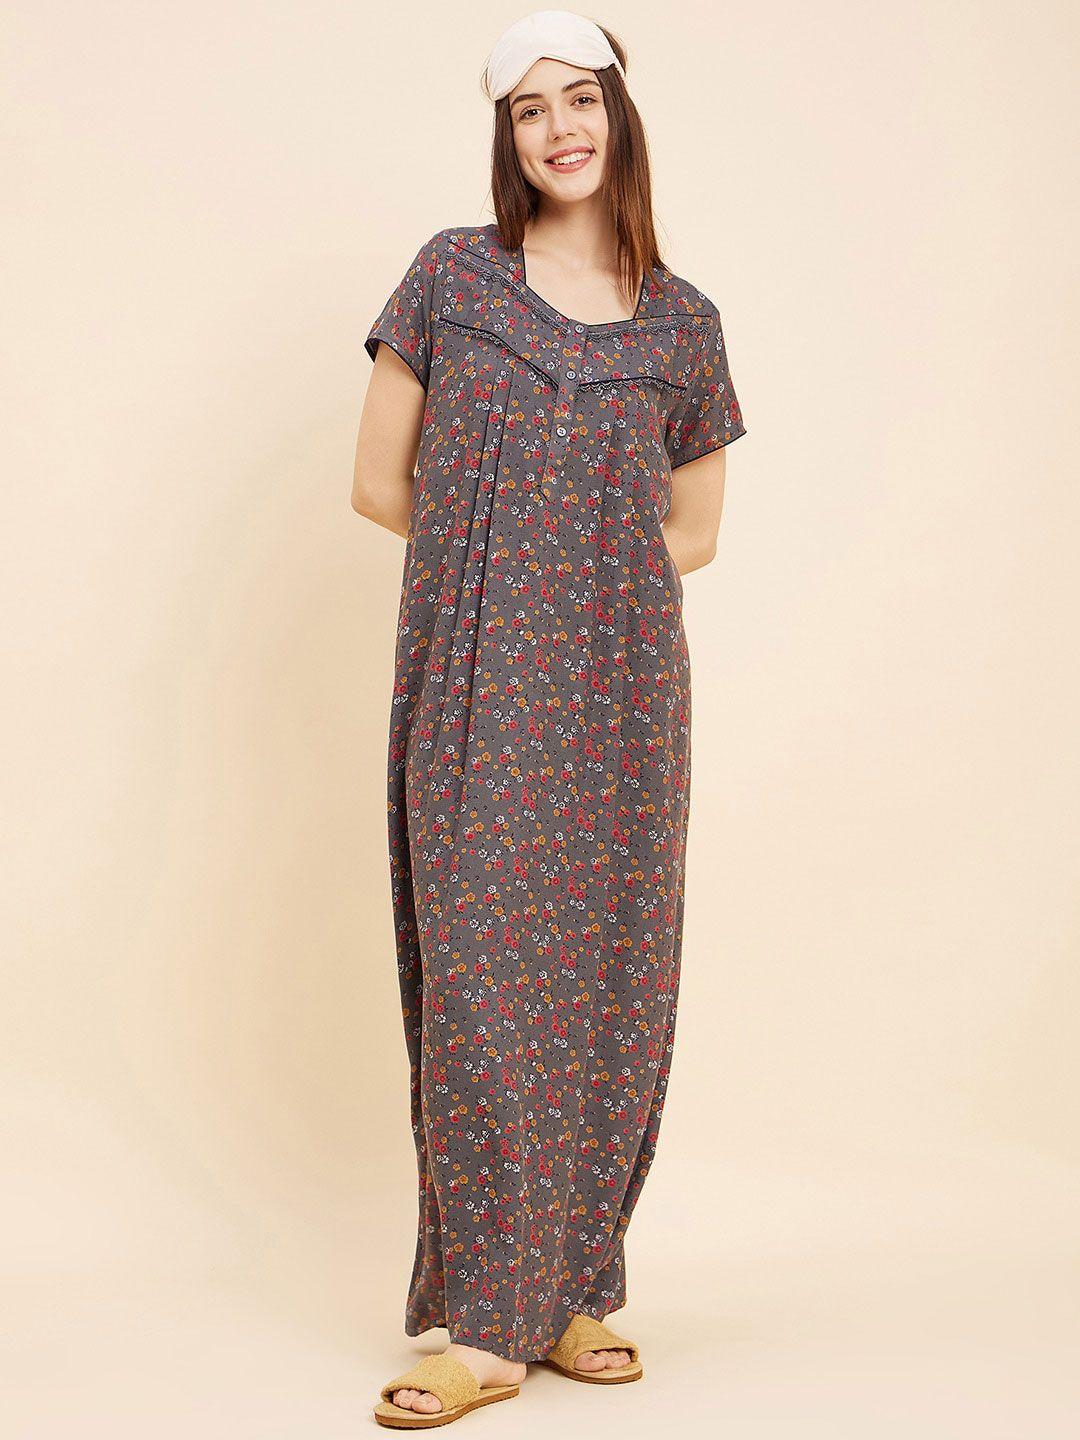 sweet-dreams-grey-floral-printed-pure-cotton-maxi-nightdress